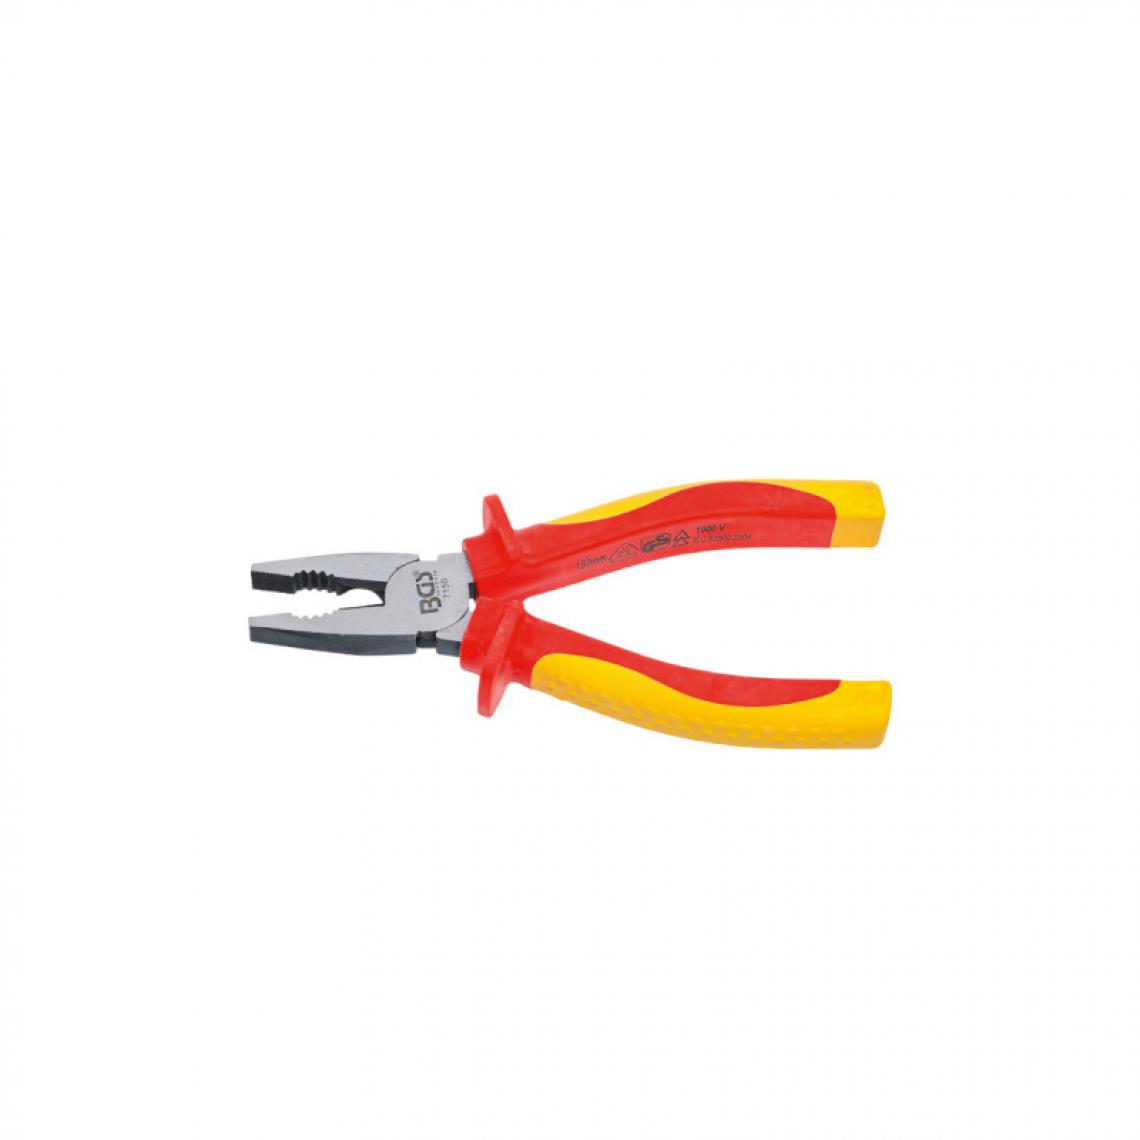 Bgs - Pince universelle VDE BGS TECHNIC - 180 mm - 7150 - Outils de coupe